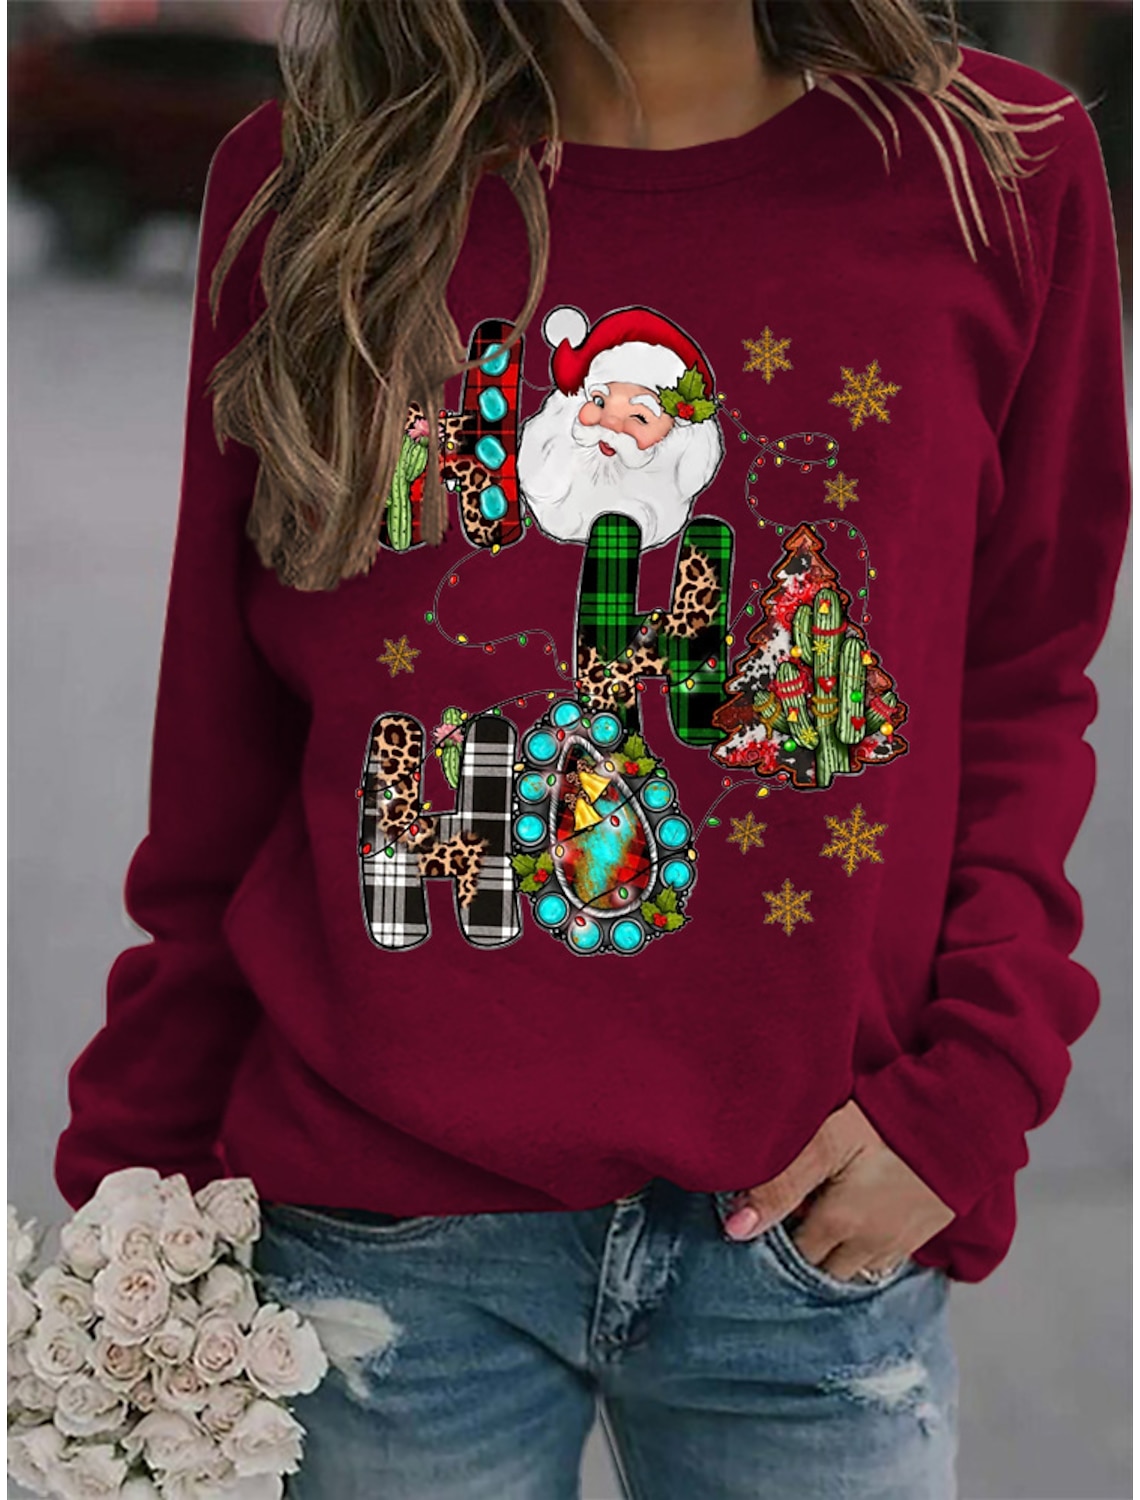 Is Neci Open During Christmas Week 2022 Schedule Women's Sweatshirt Pullover Plaid Checkered Santa Claus Christmas Tree  Print Crew Neck Christmas Christmas Gifts Daily Cotton Active Streetwear  Hoodies Sweatshirts Blue Blushing Pink Wine 8905306 2022 – $24.83